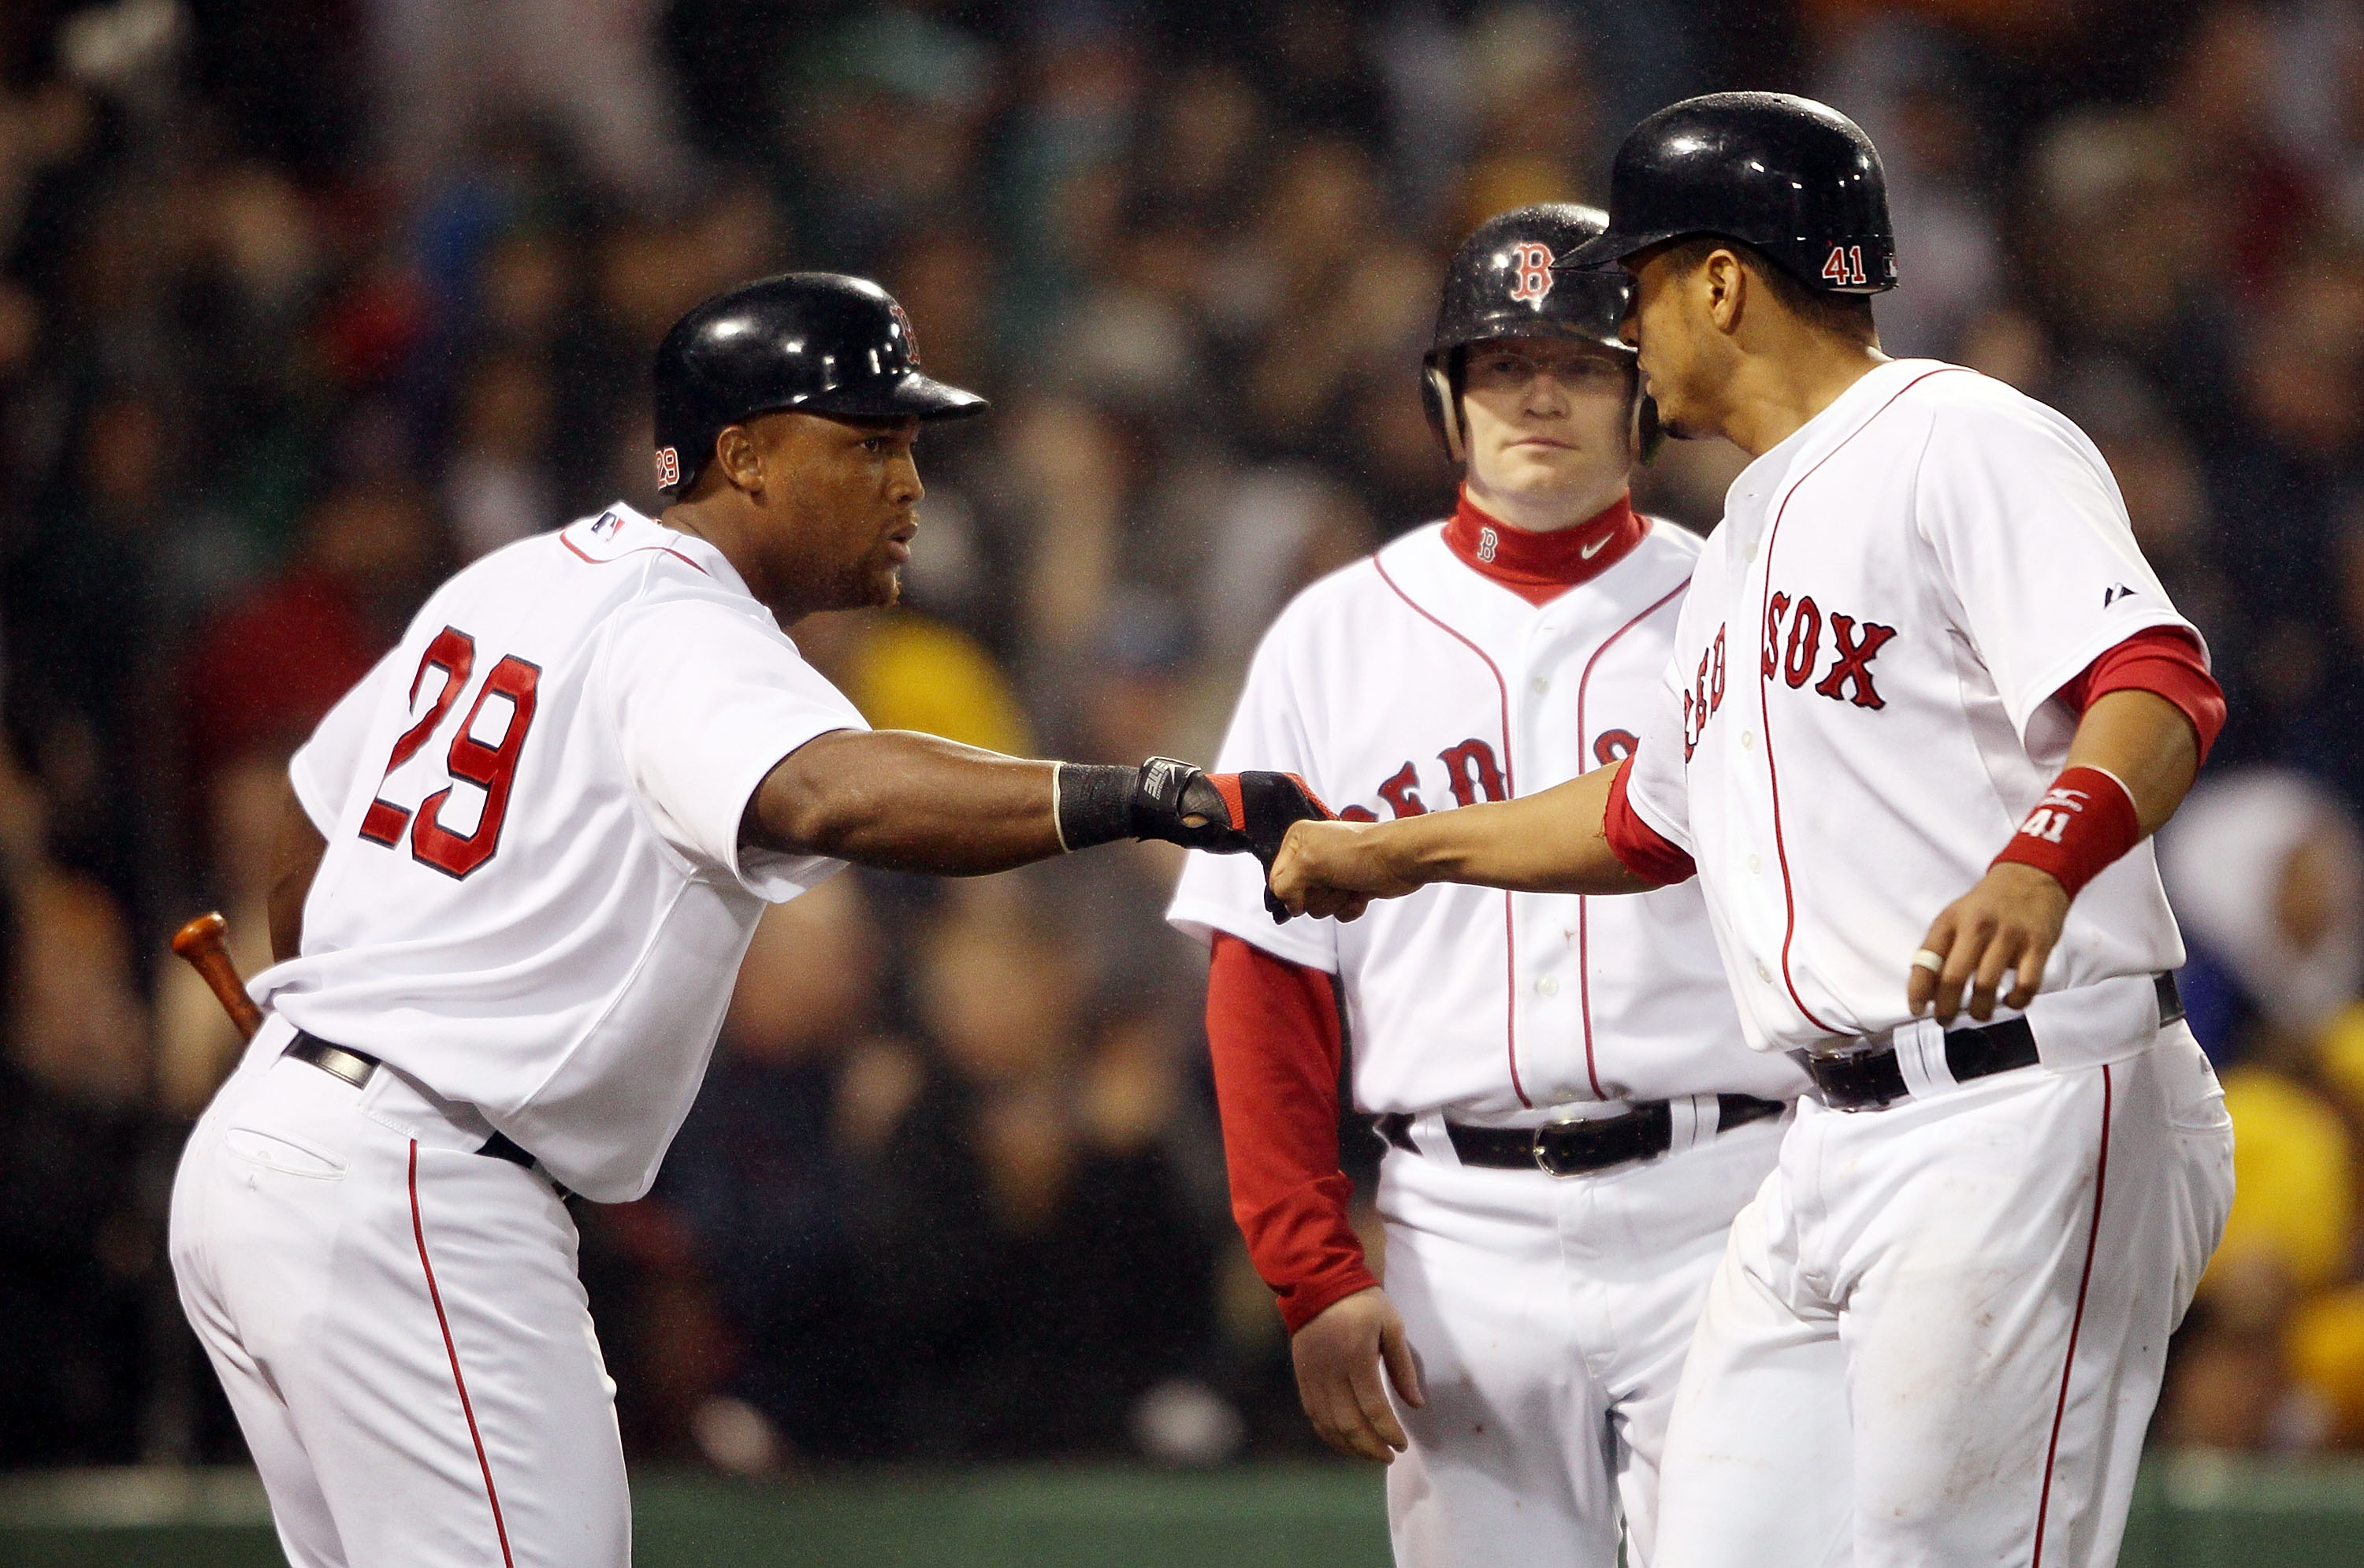 Photo: Boston Red Sox catcher Victor Martinez walks in from the